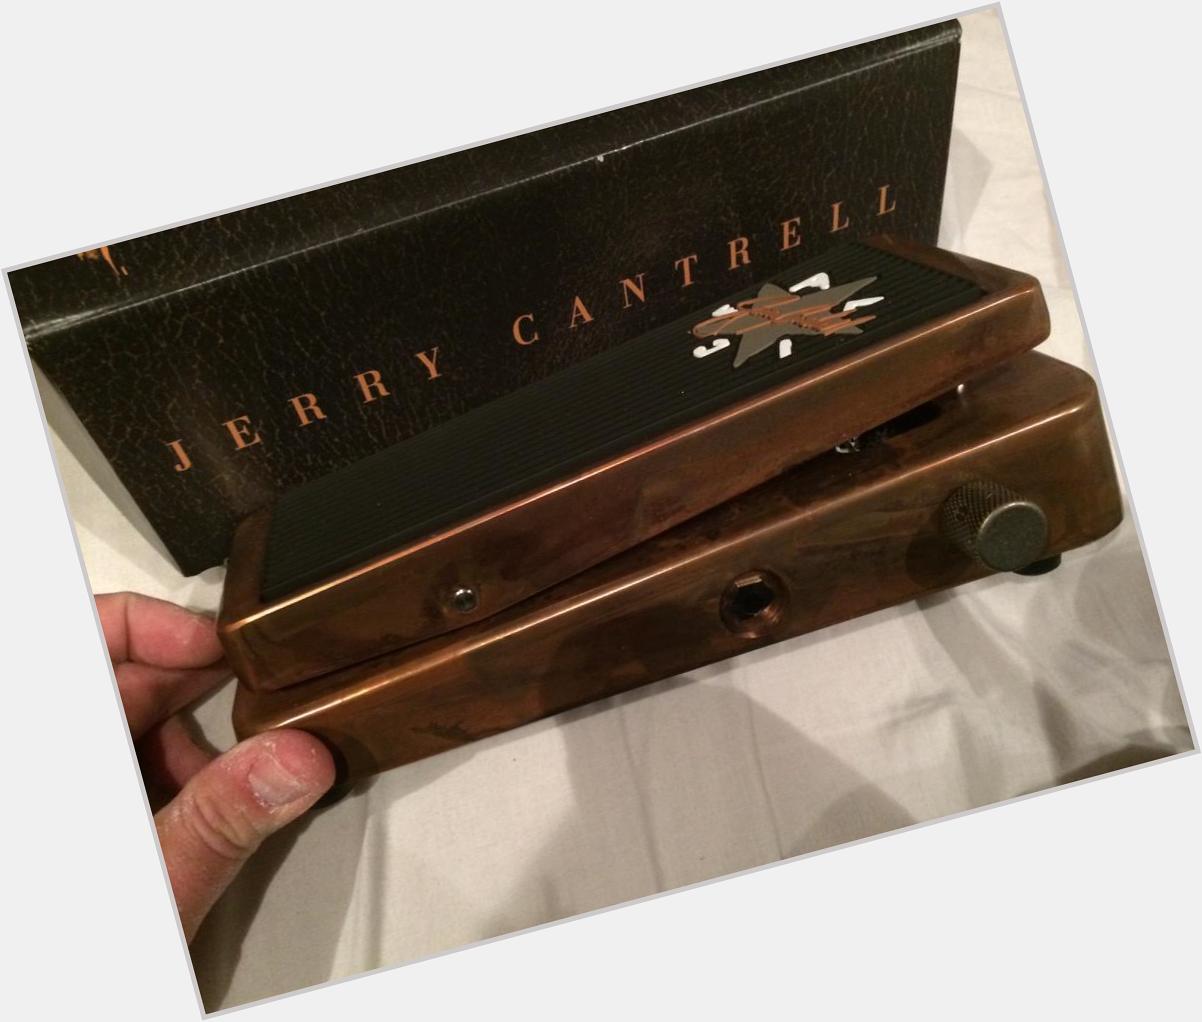 Happy birthday Jerry Cantrell. You design an awesome wah 